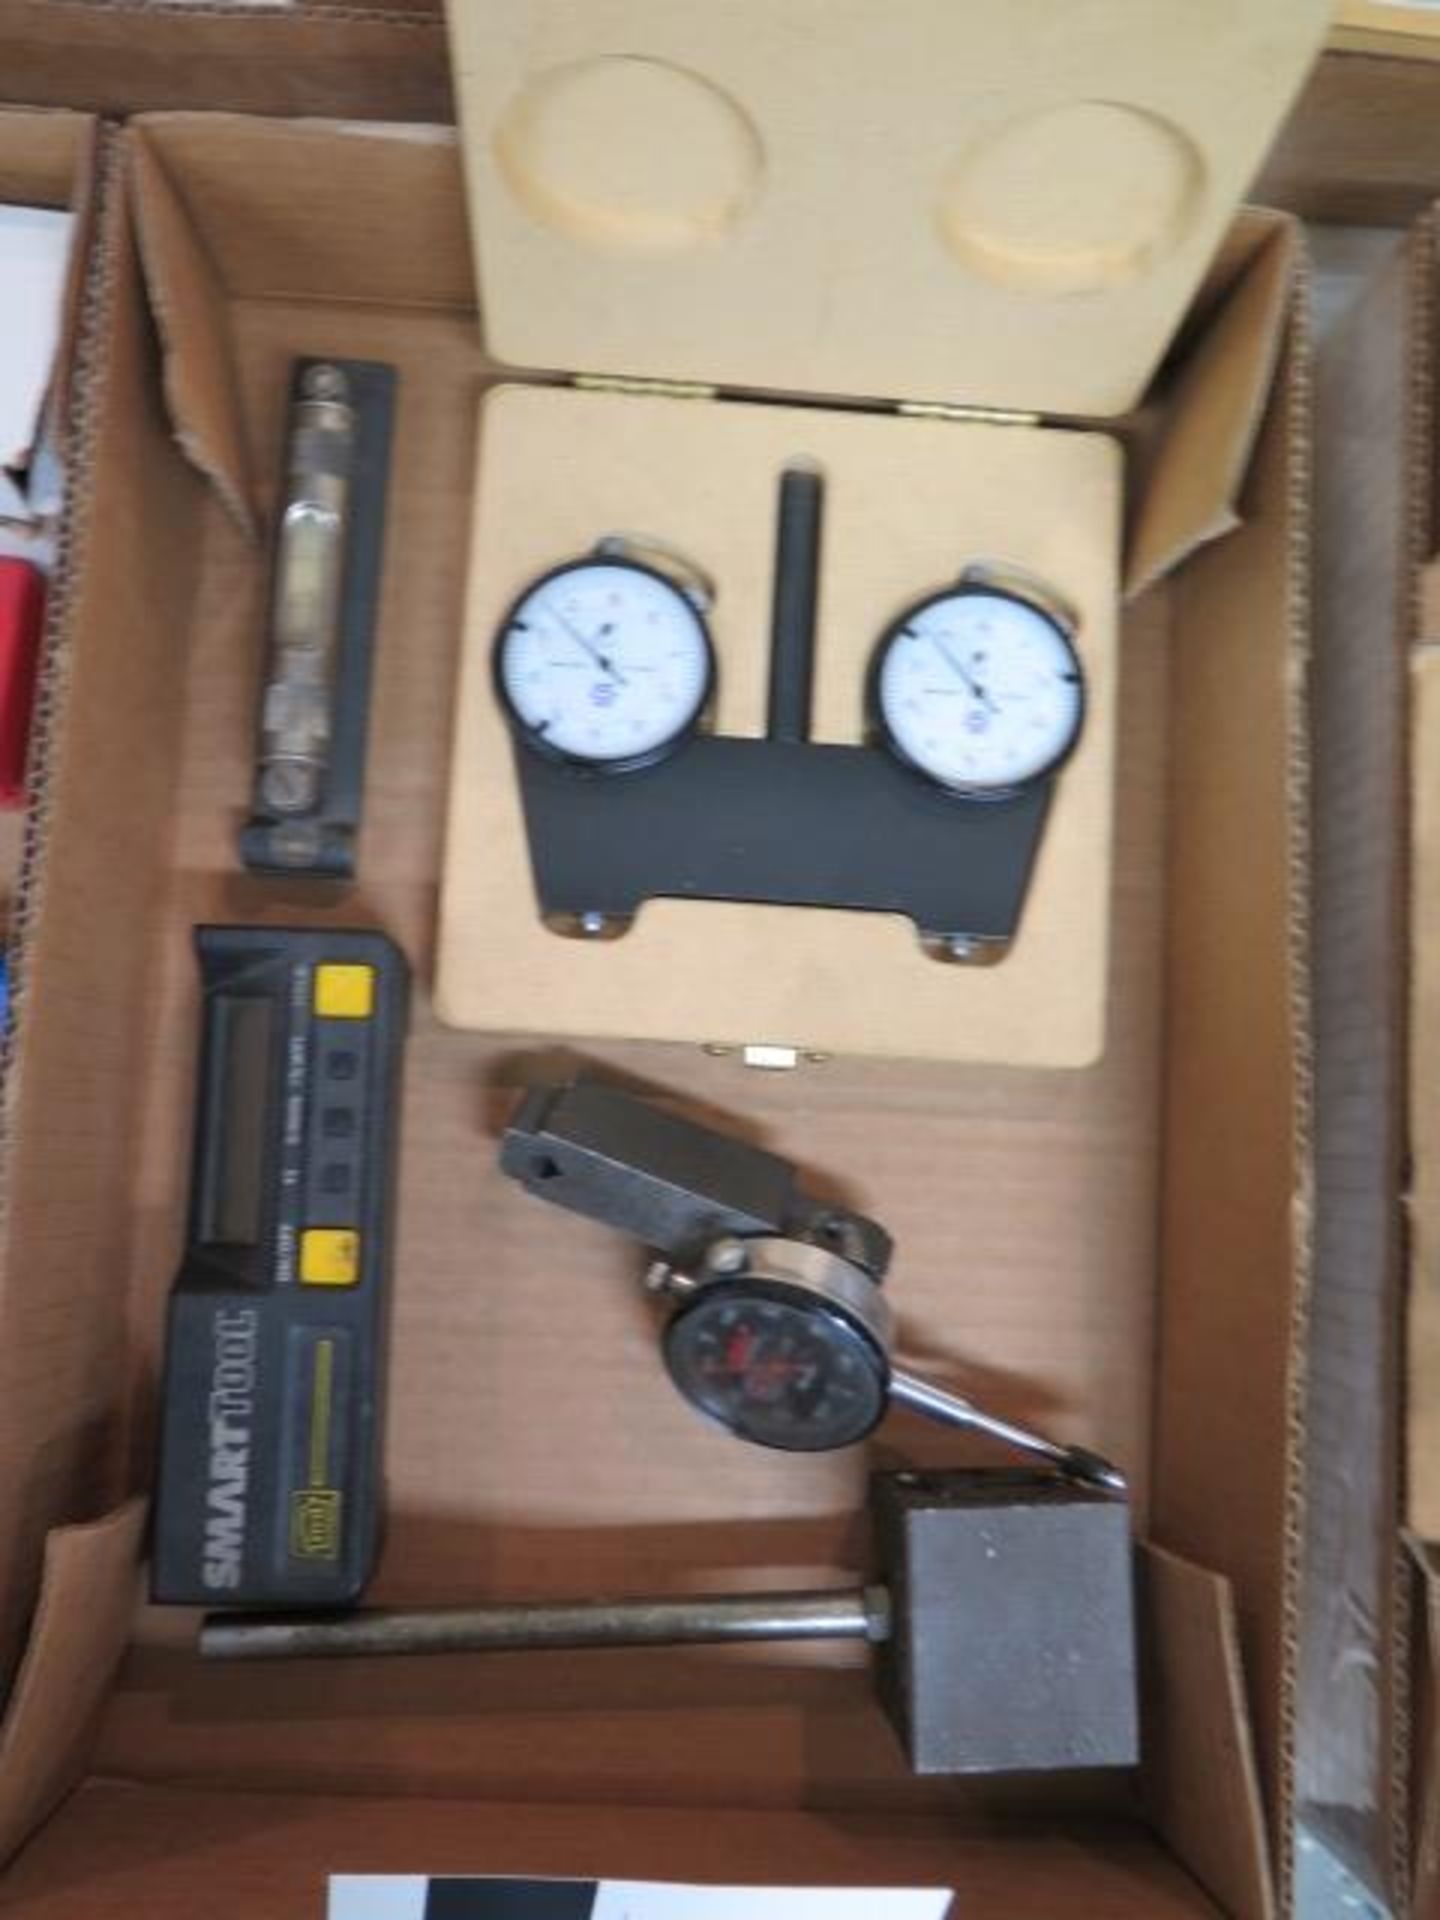 Starrett 6" Master Level, AMT Mill Trammel Gage, MD Digital Level and (2) Magnetic Indicator - Image 2 of 5